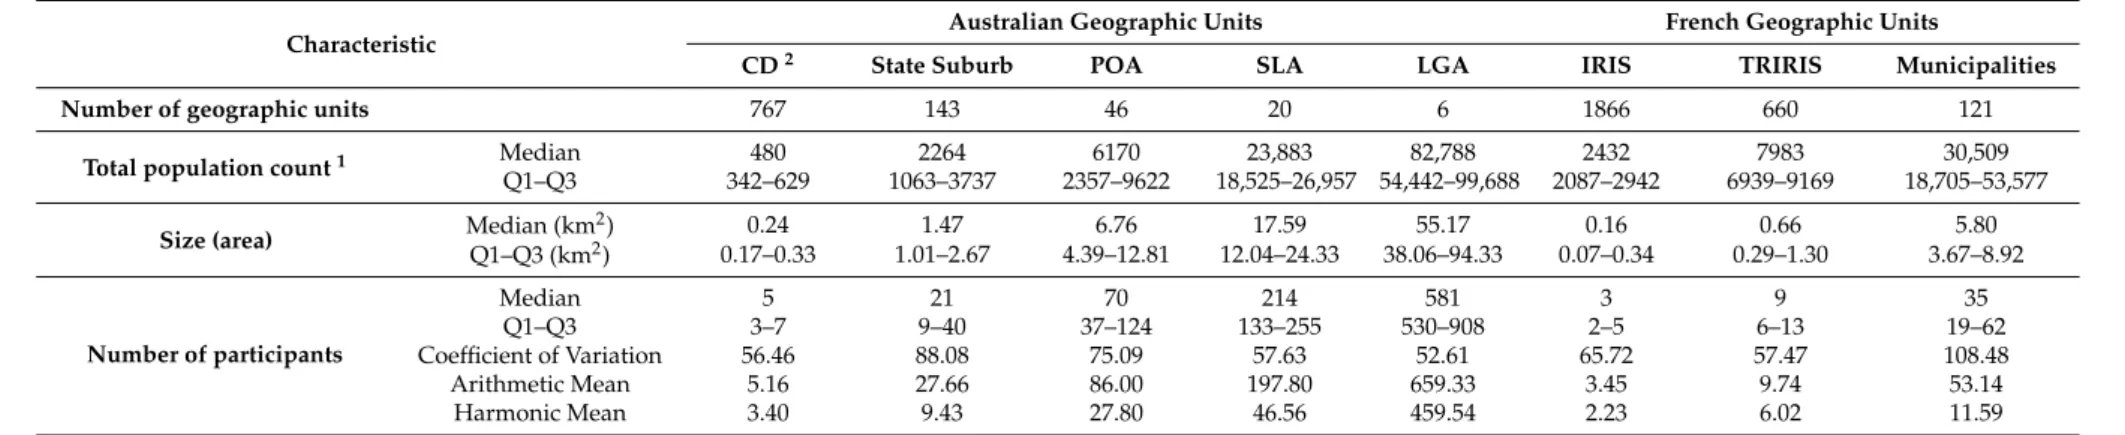 Table 1. Descriptive statistics for Australian (Adelaide) and French (Paris) administrative geographic units analysed between studies.